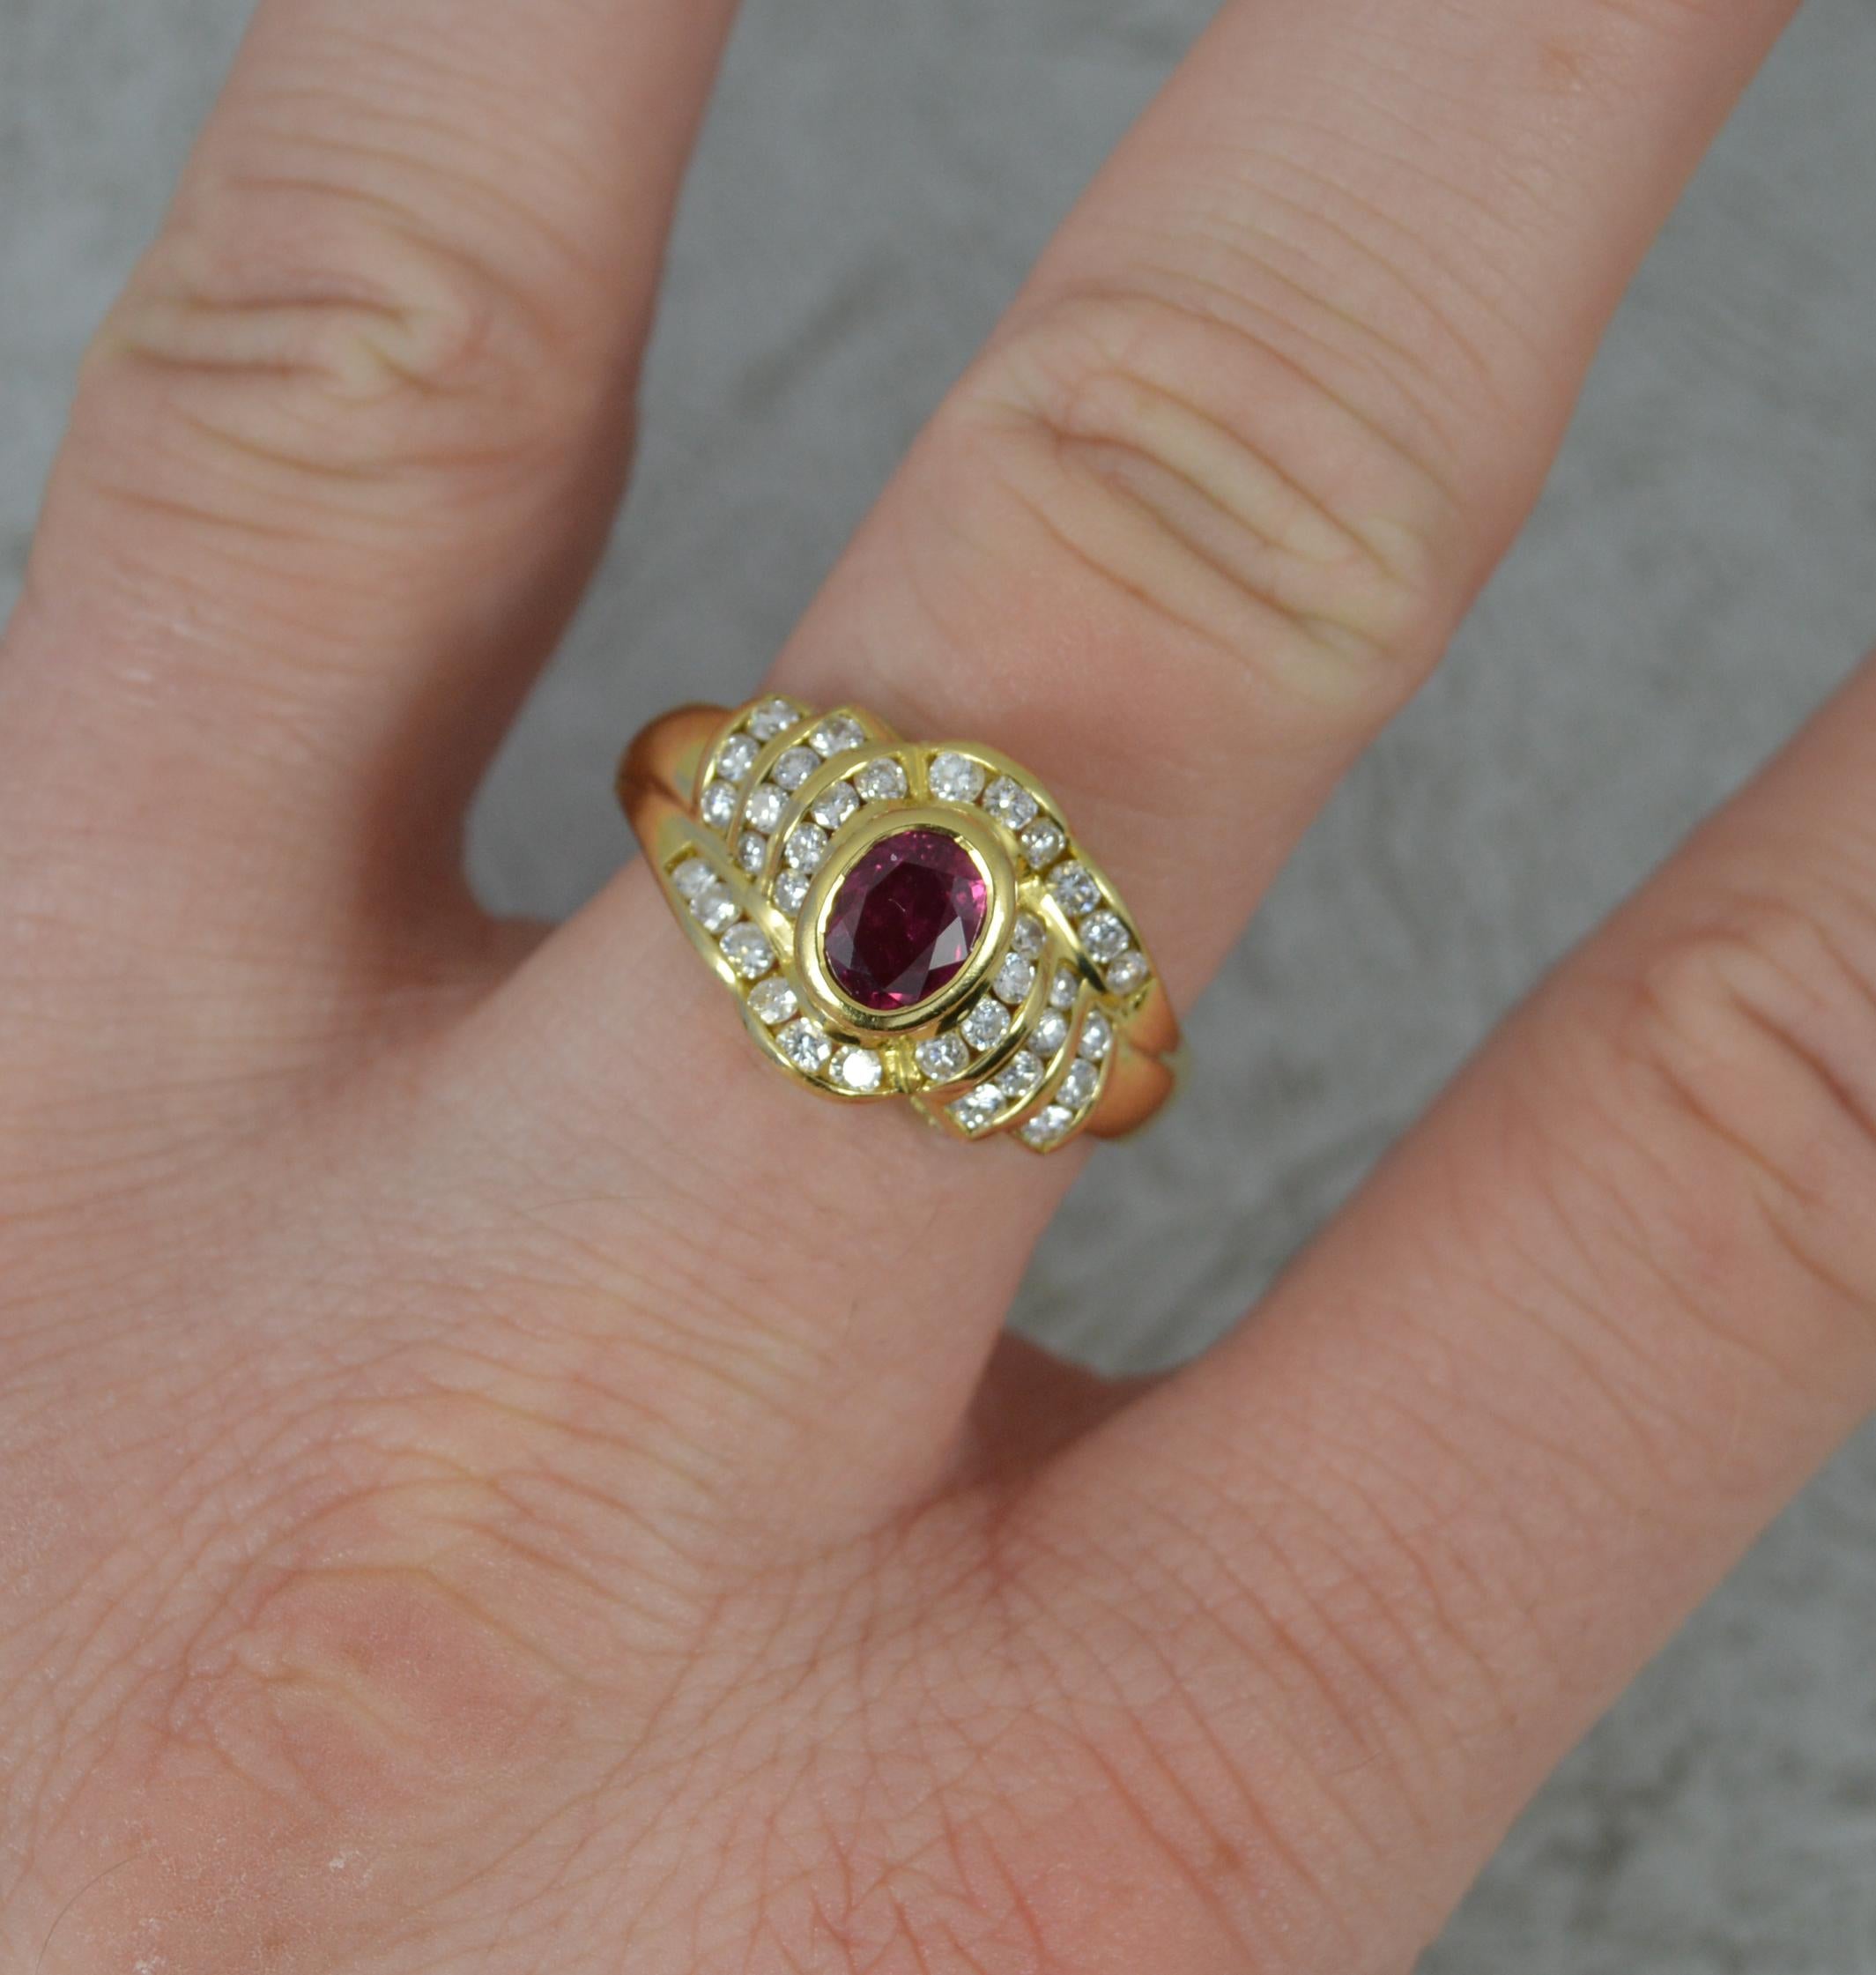 A beautiful Ruby and Diamond cluster ring.
Solid 18 carat yellow gold example.
Designed with an oval ruby to centre in full bezel setting, 4.7mm x 6.5mm. Surrounded are 34 round brilliant cut diamonds, vs clarity, e-f colour. 0.50 carats.
Superb